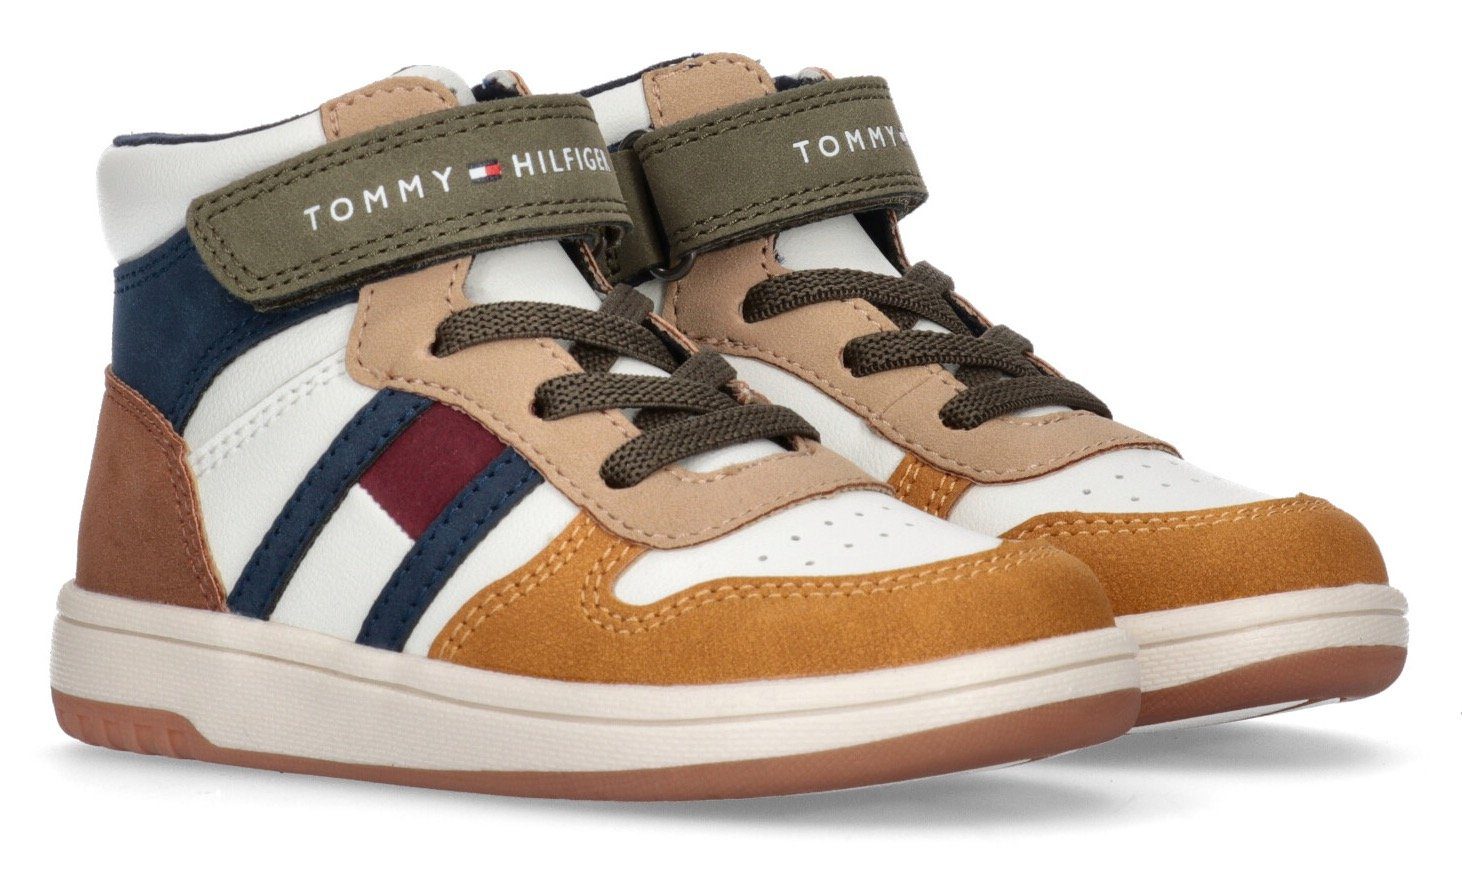 FLAG modischen Sneaker Tommy Look TOP SNEAKER LACE-UP/VELCRO HIGH colorblocking Hilfiger im